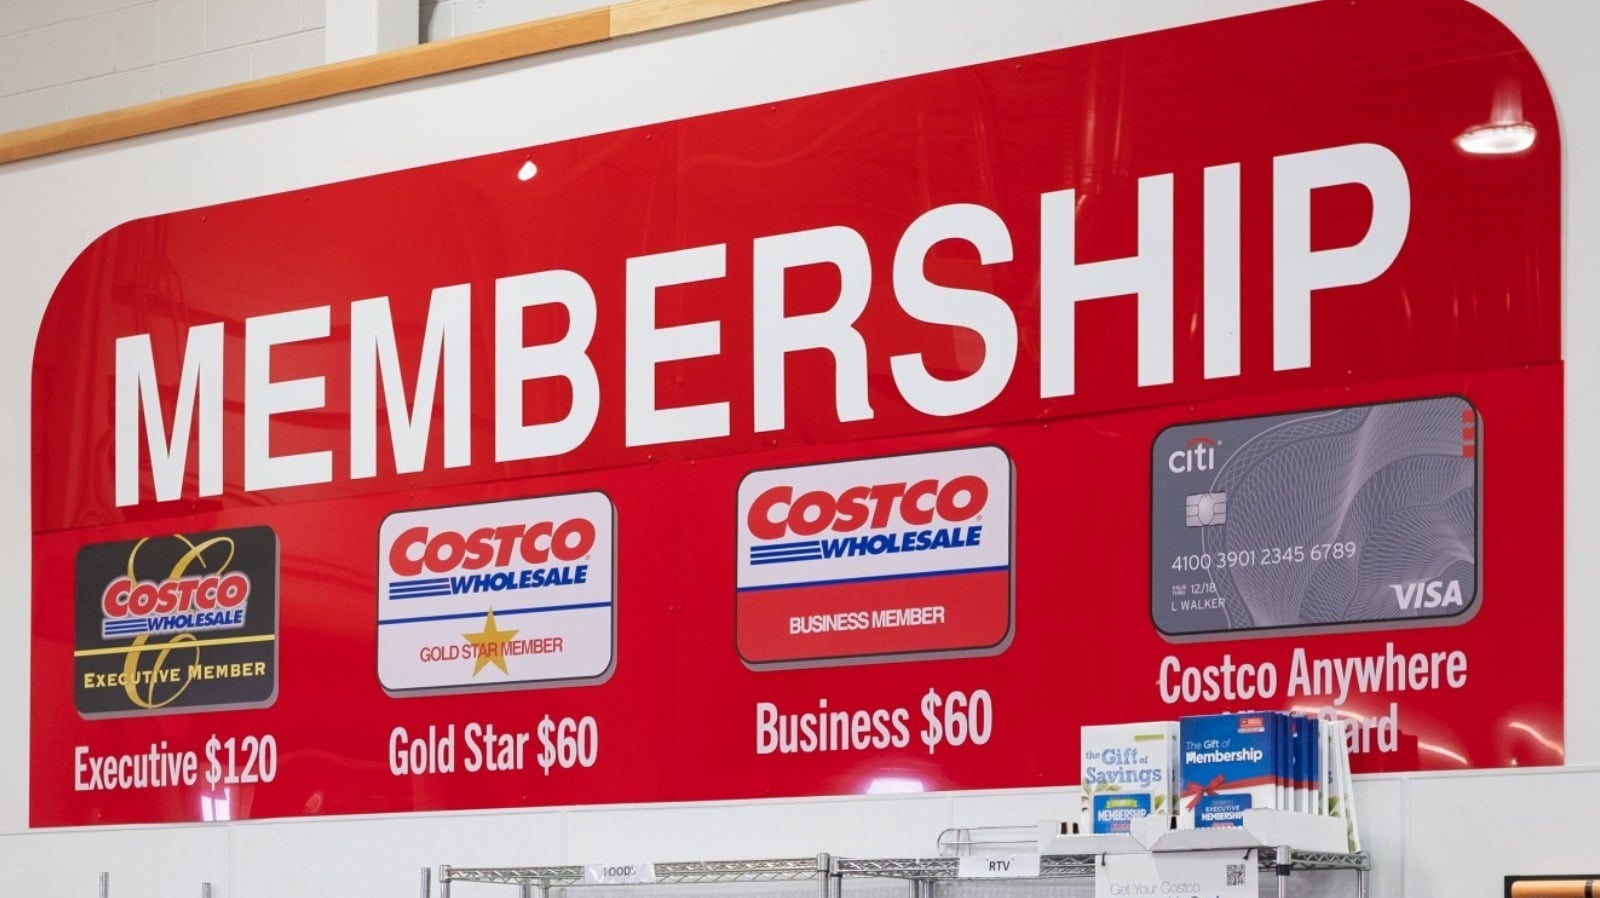 Check Costco membership Costs and the difference between each type of